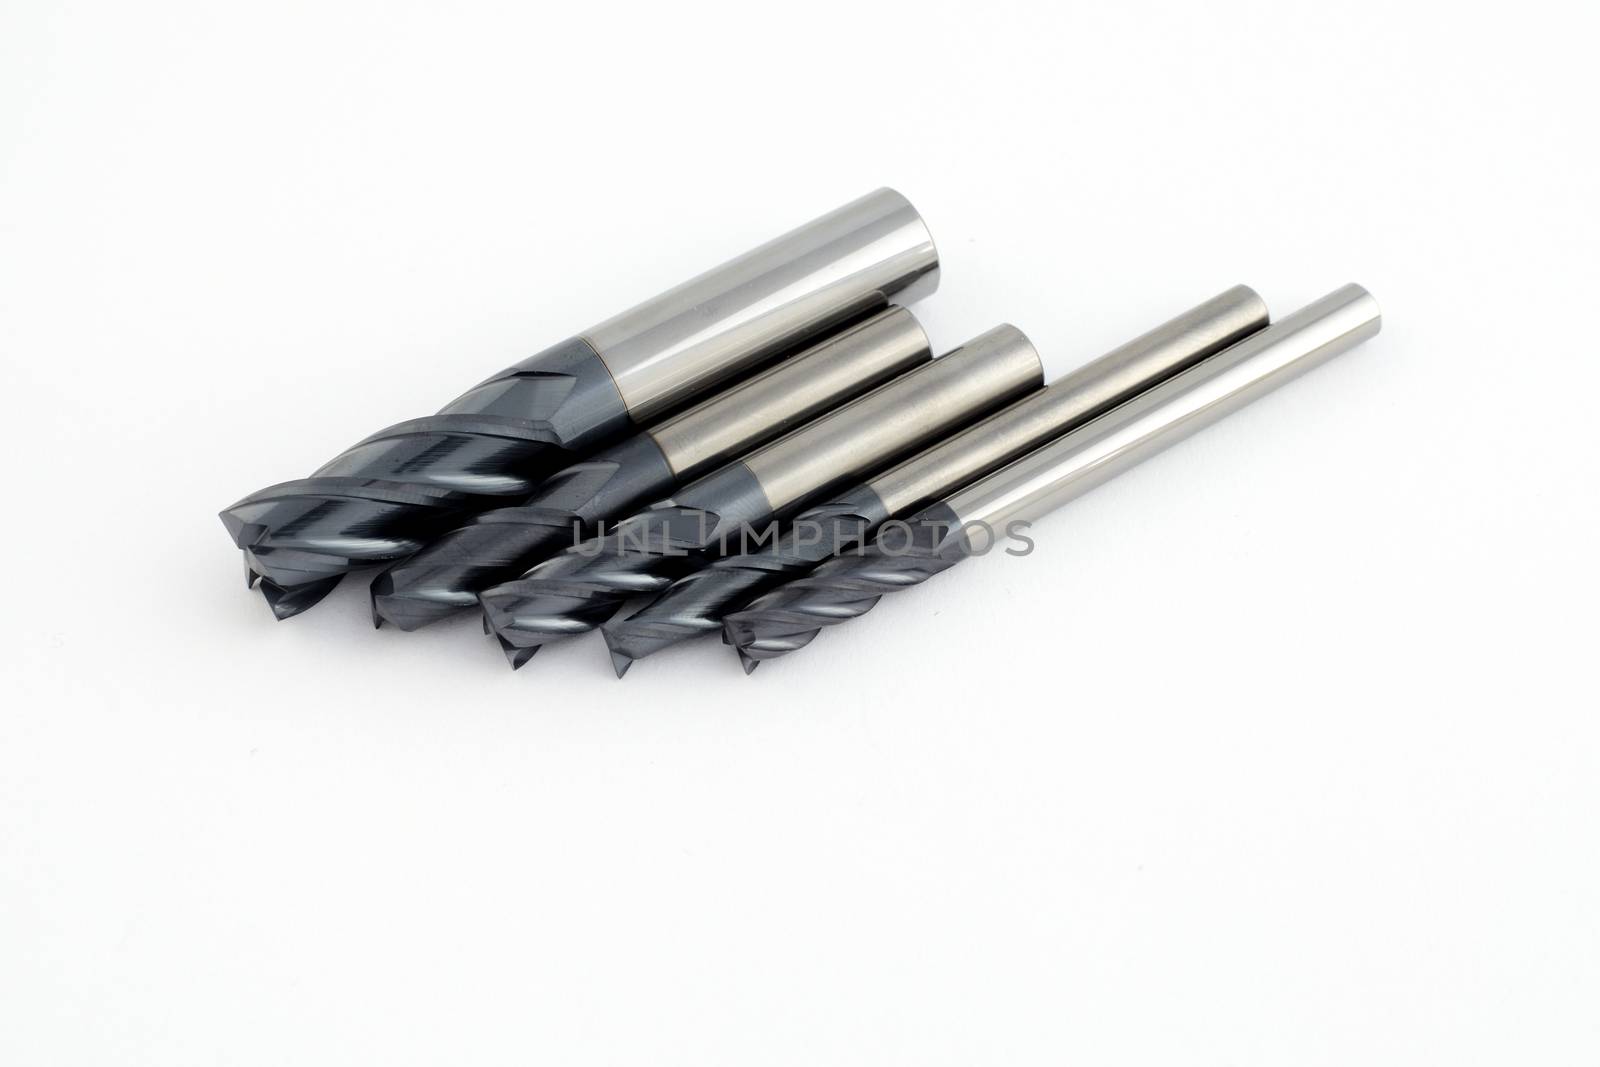 Professional cutting tools. Few metallic carbide endmills, different size used for metalwork. 